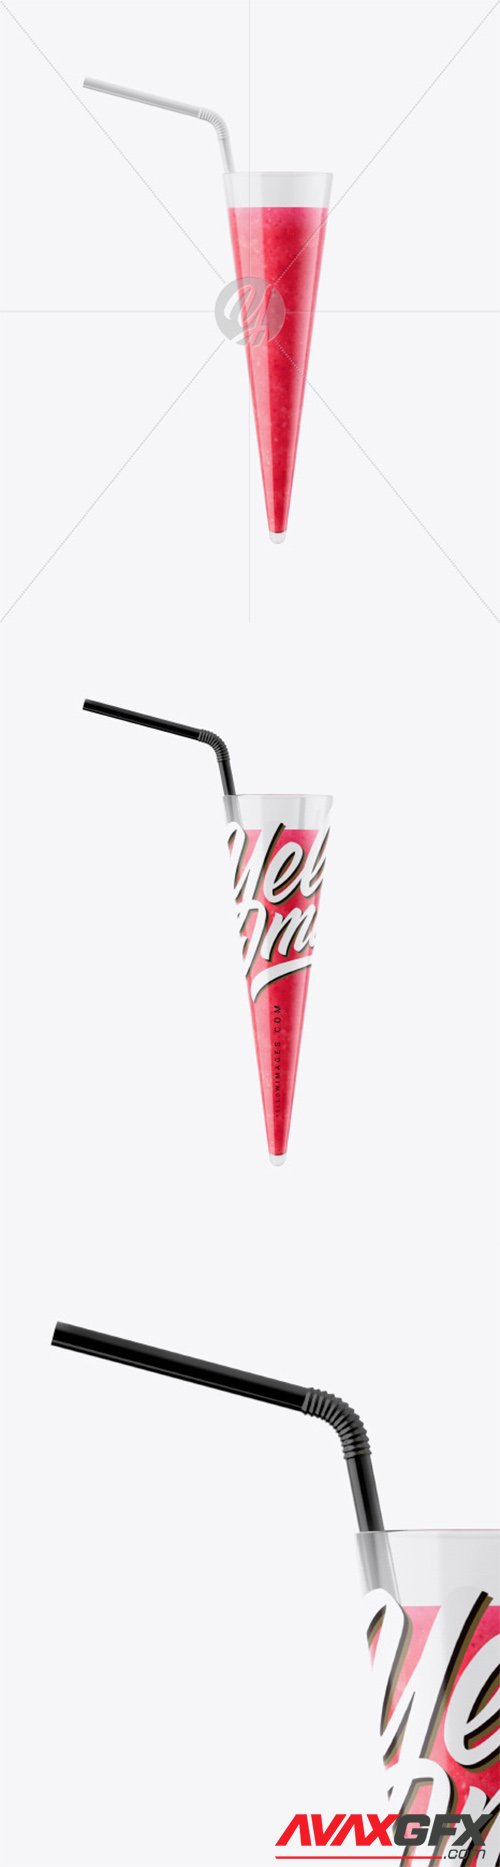 Download Plastic Cup W Berries Smoothie And Straw Mockup 60720 Avaxgfx All Downloads That You Need In One Place Graphic From Nitroflare Rapidgator Yellowimages Mockups